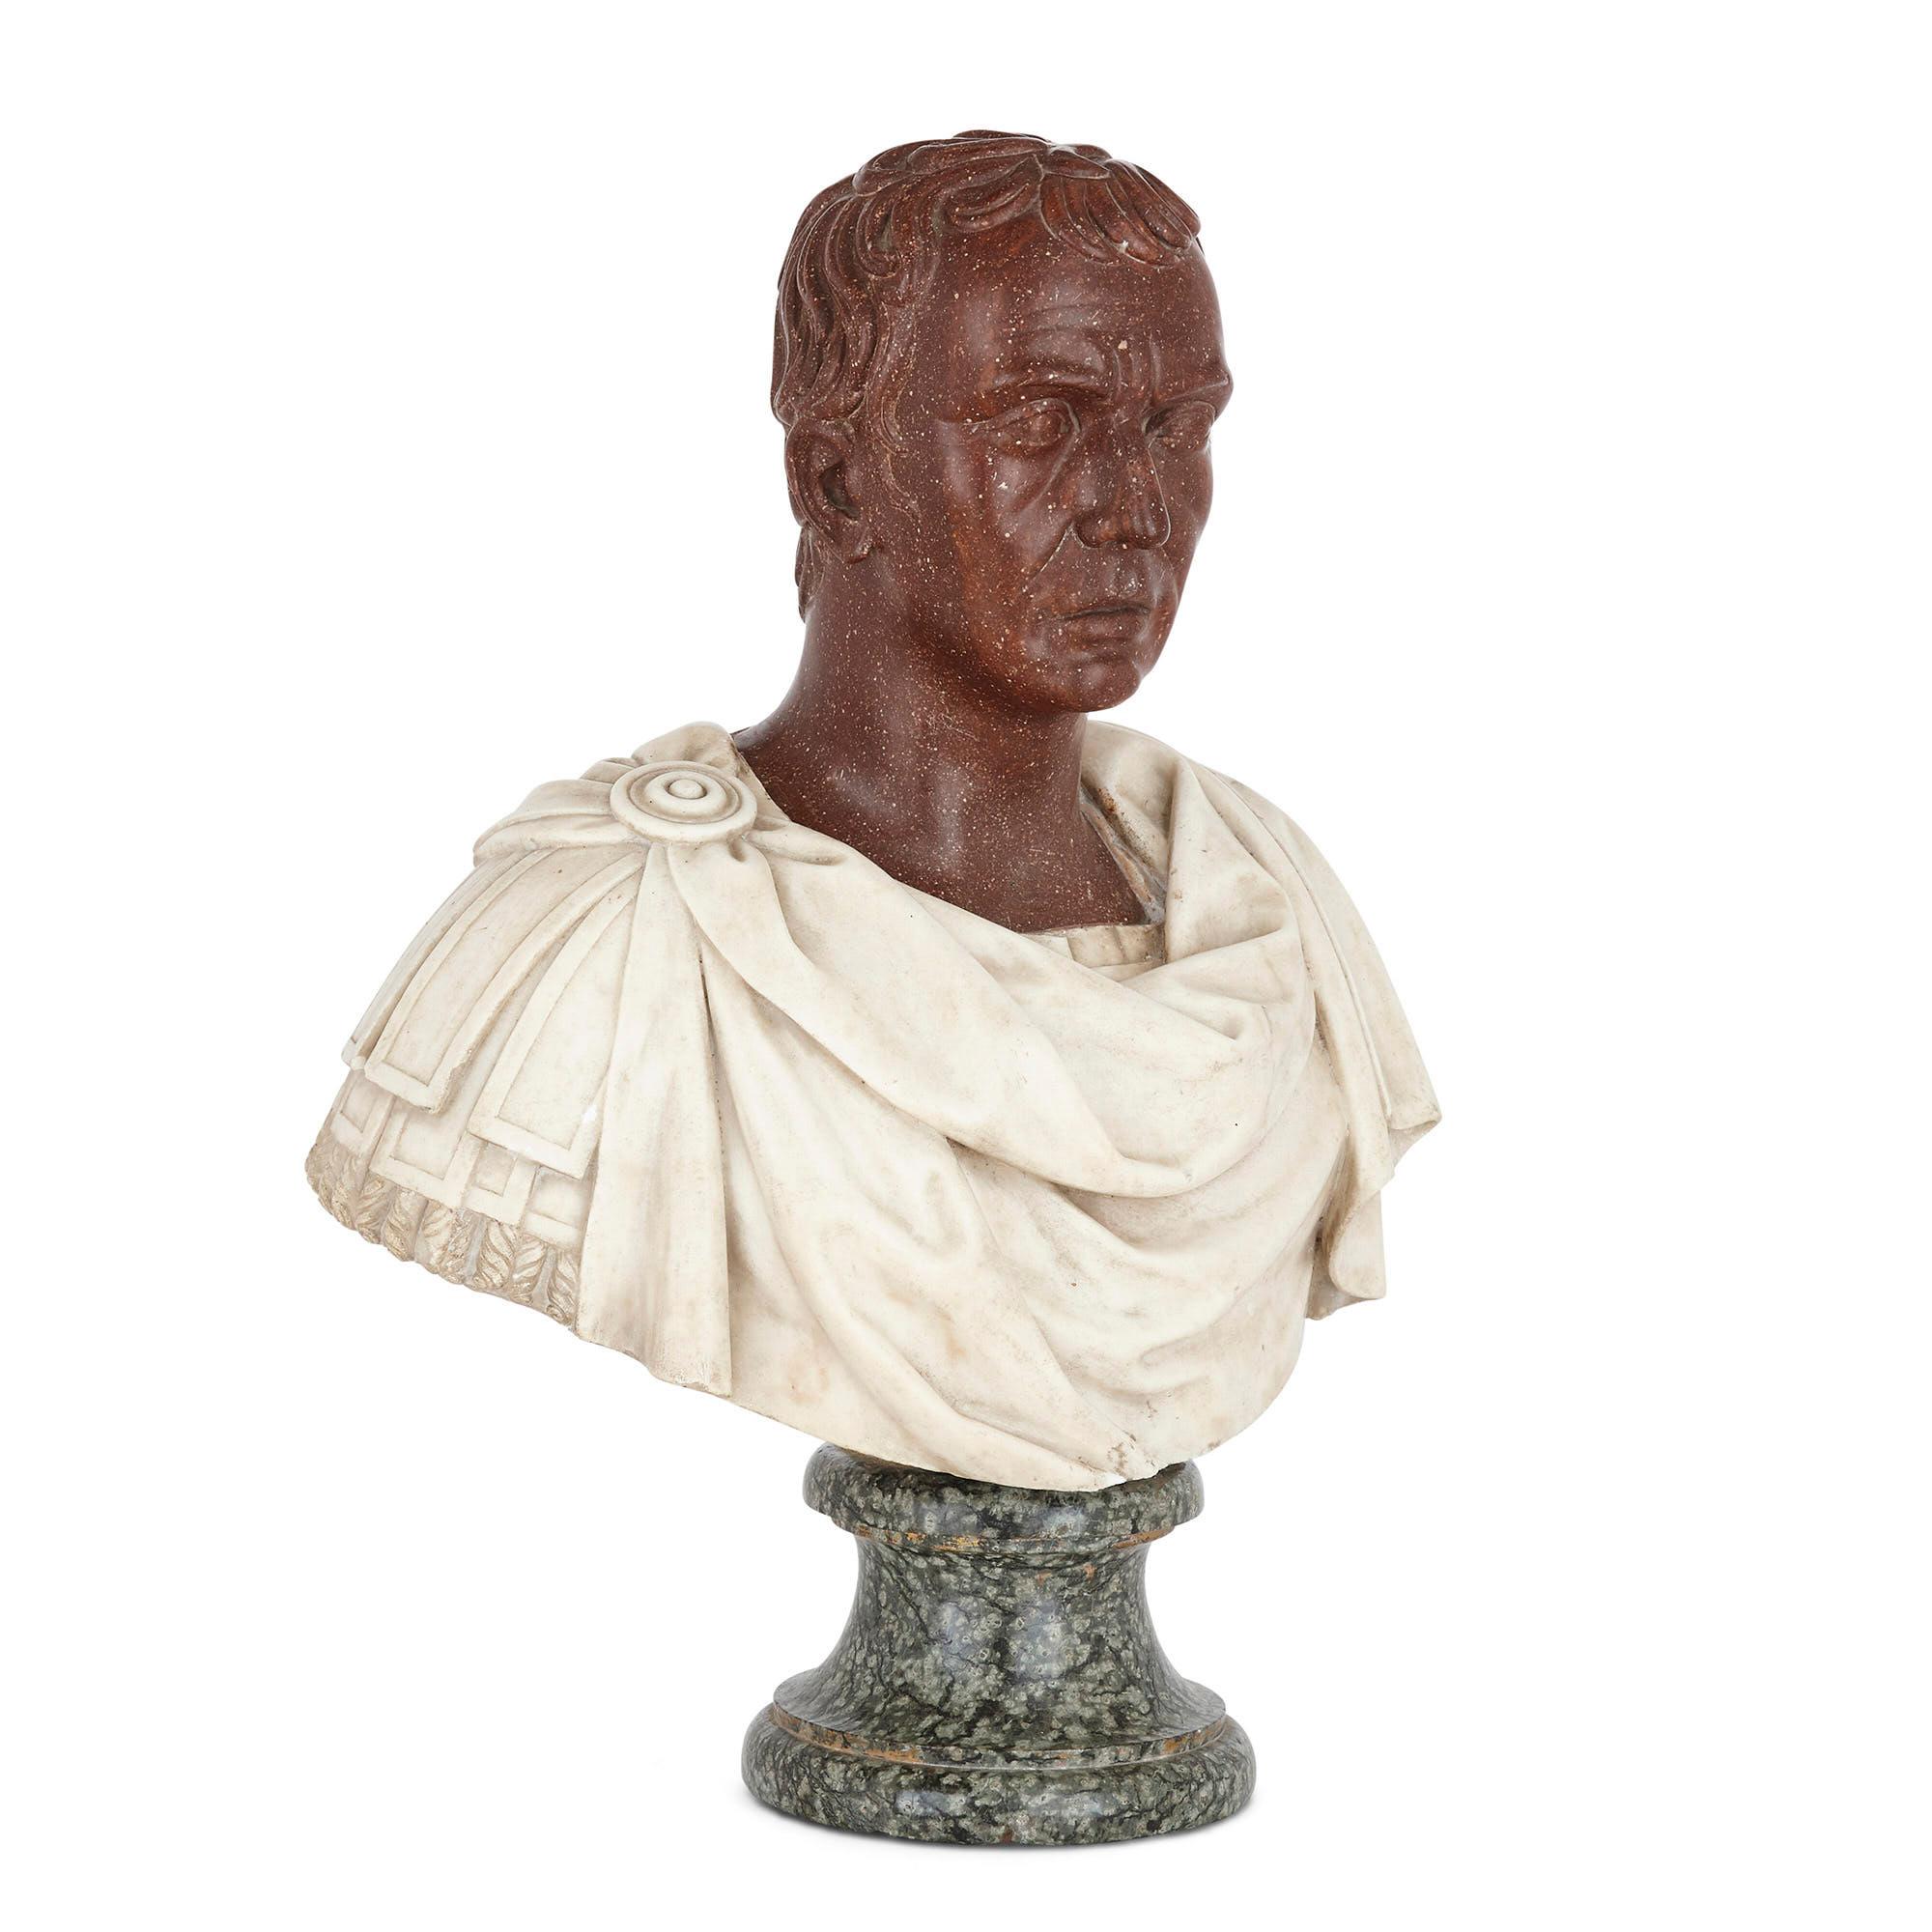 18th century Italian serpentine, porphyry, and marble bust
Italian, late 18th century
Measures: Height 78cm, width 62cm, depth 30cm

This fine sculptural bust takes as its inspiration the form of portrait bust that flourished during the late